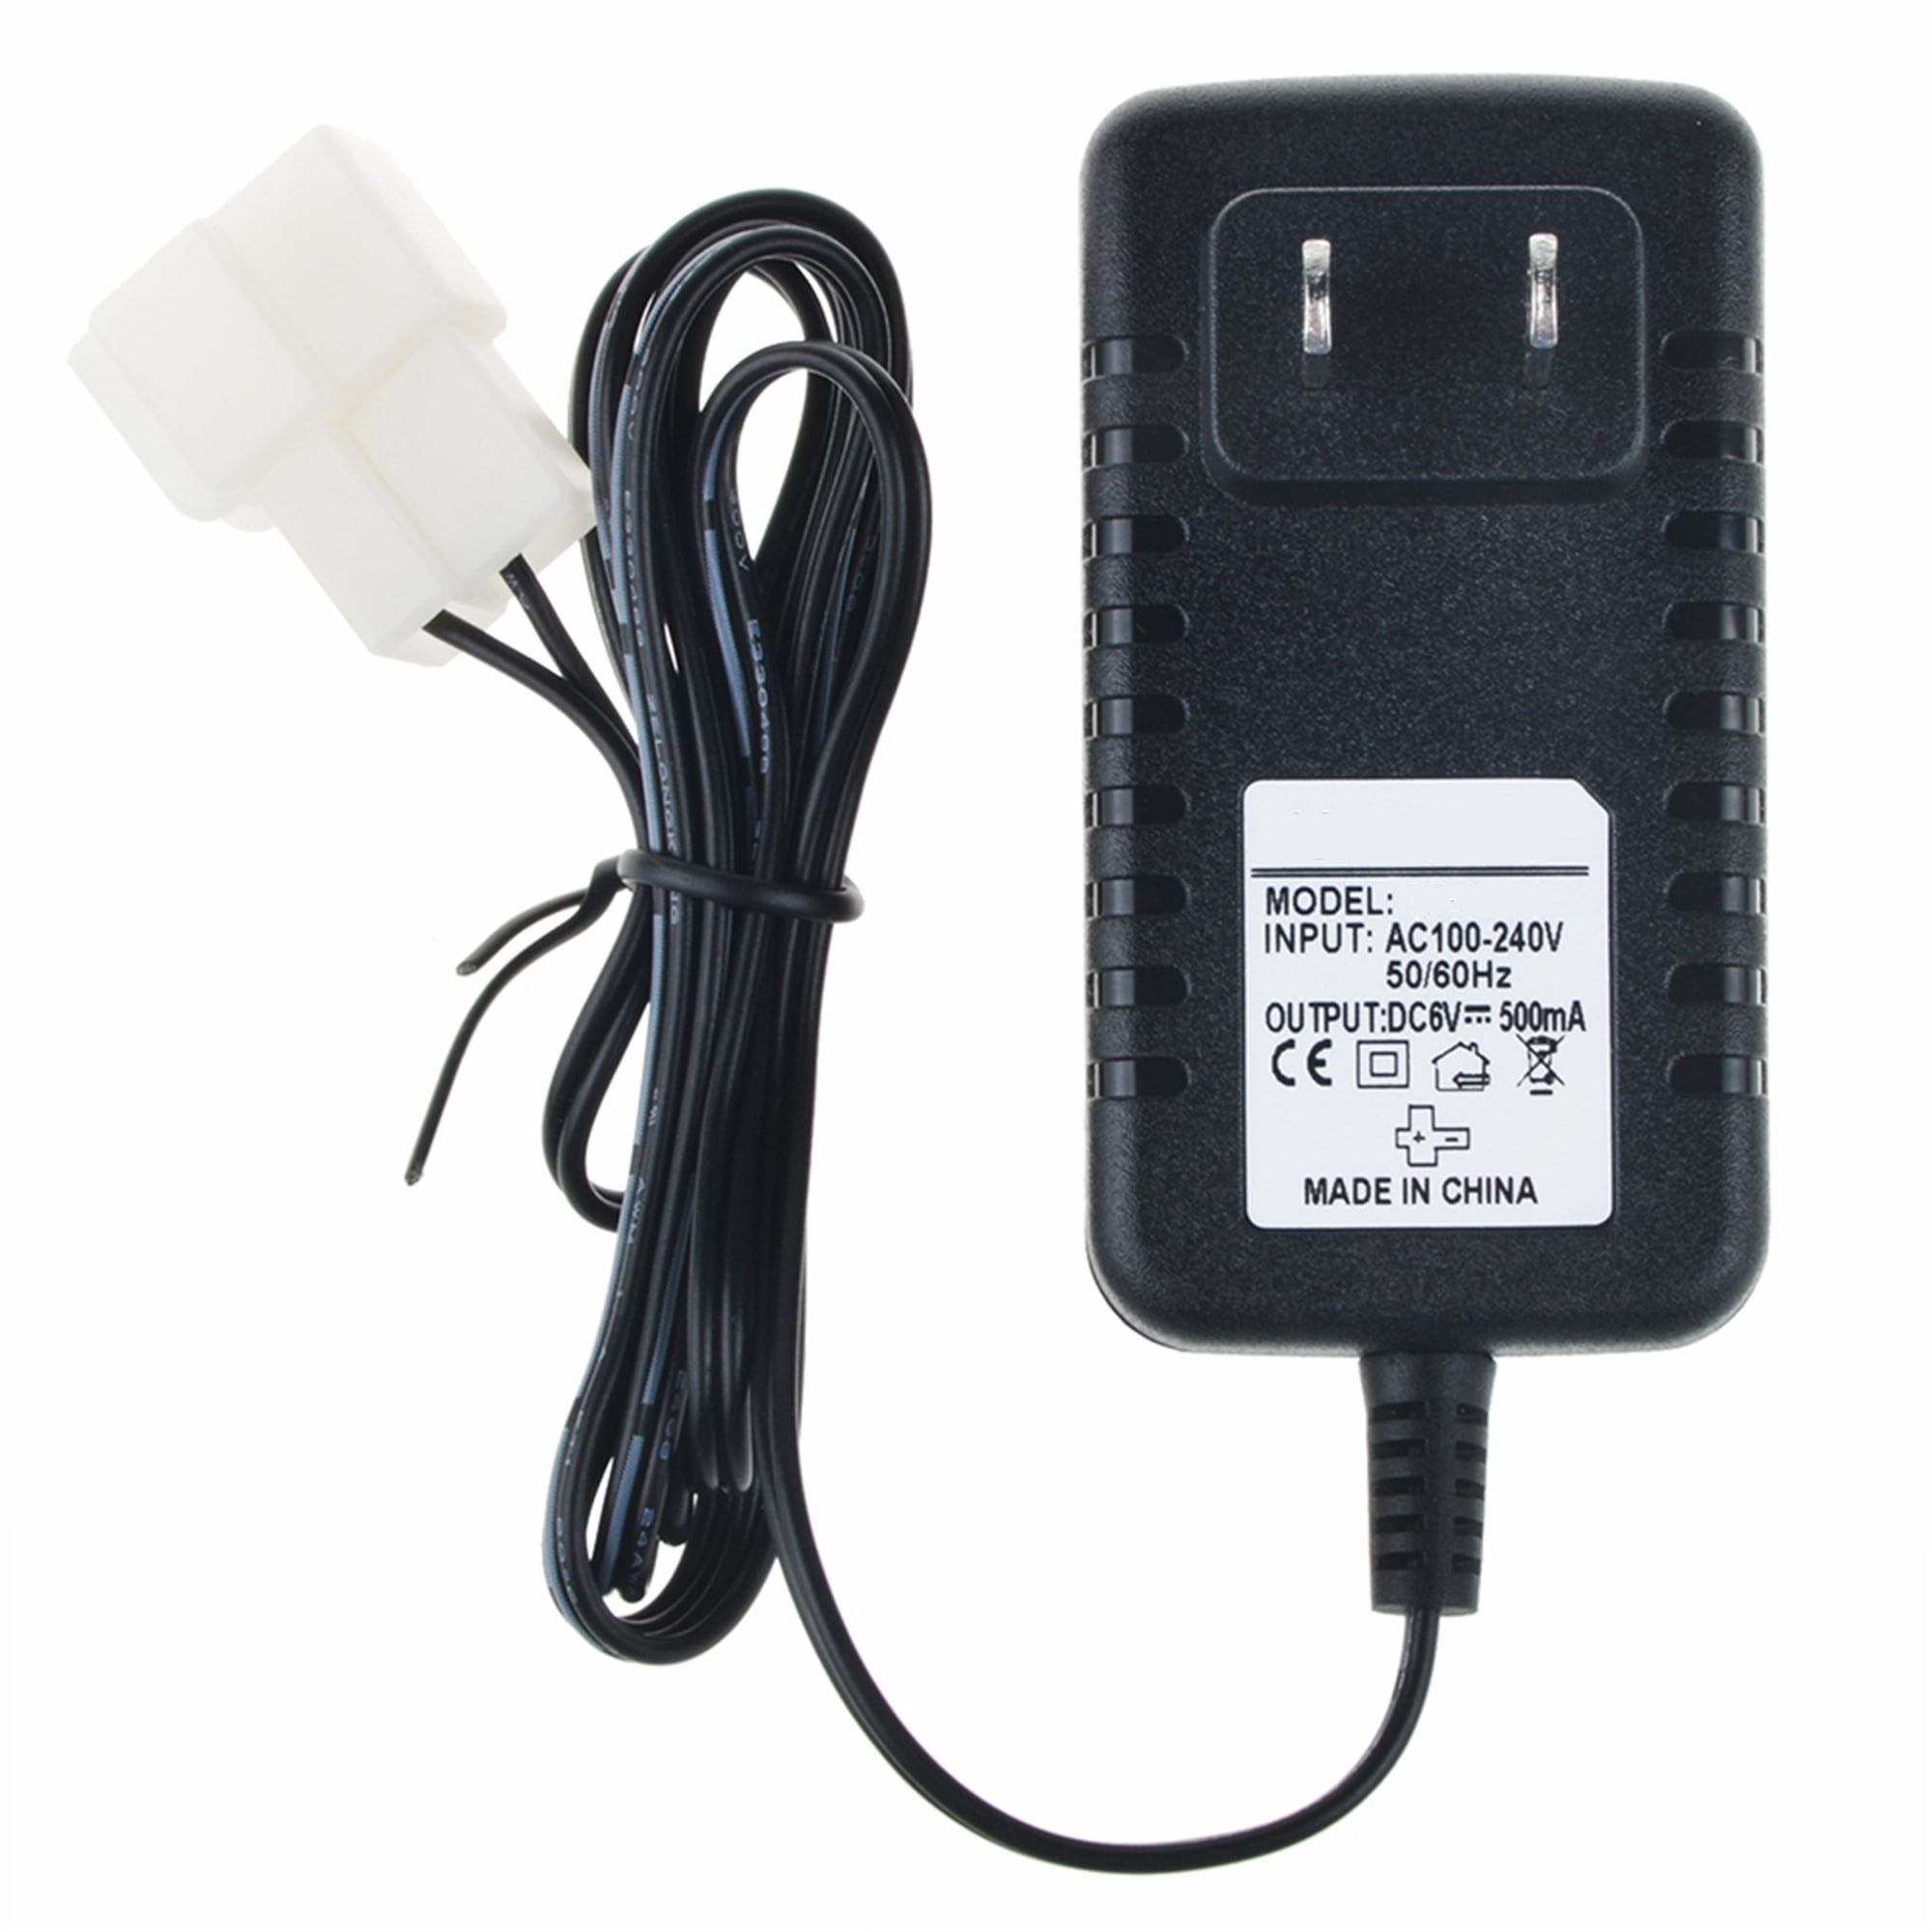 Wall Charger AC Adapter for KID TRAX ATV Quad 6V Battery Powered Ride 